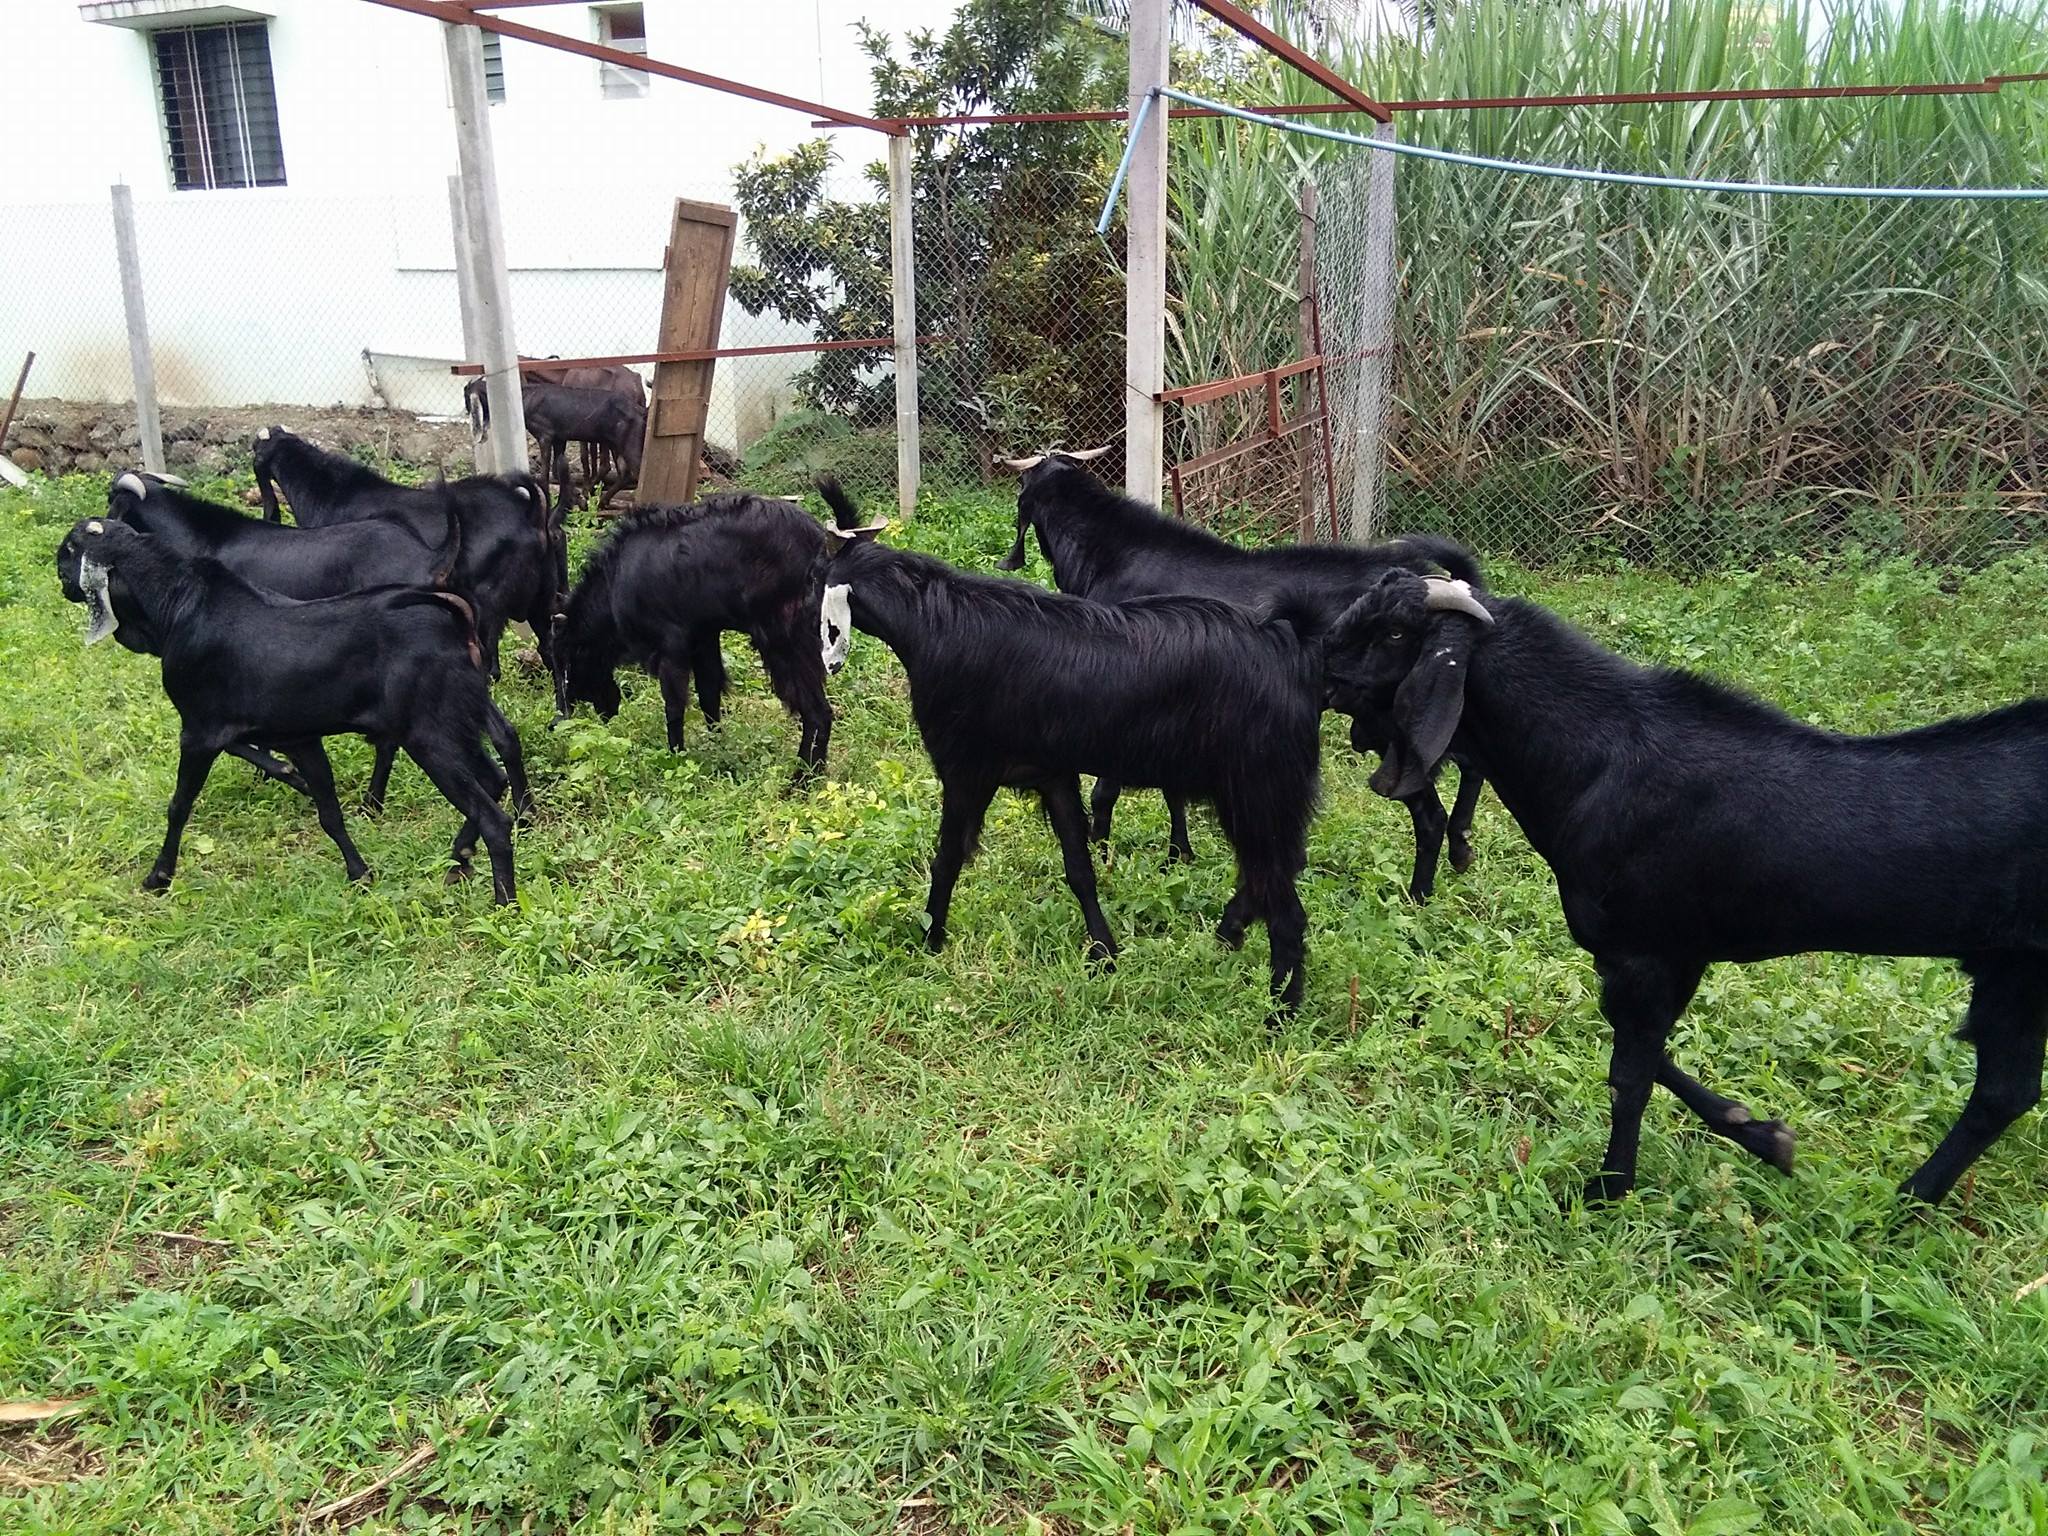 COMMERCIAL GOAT FARMING PROJECT REPORT AS PER NABARD – Pashudhan praharee